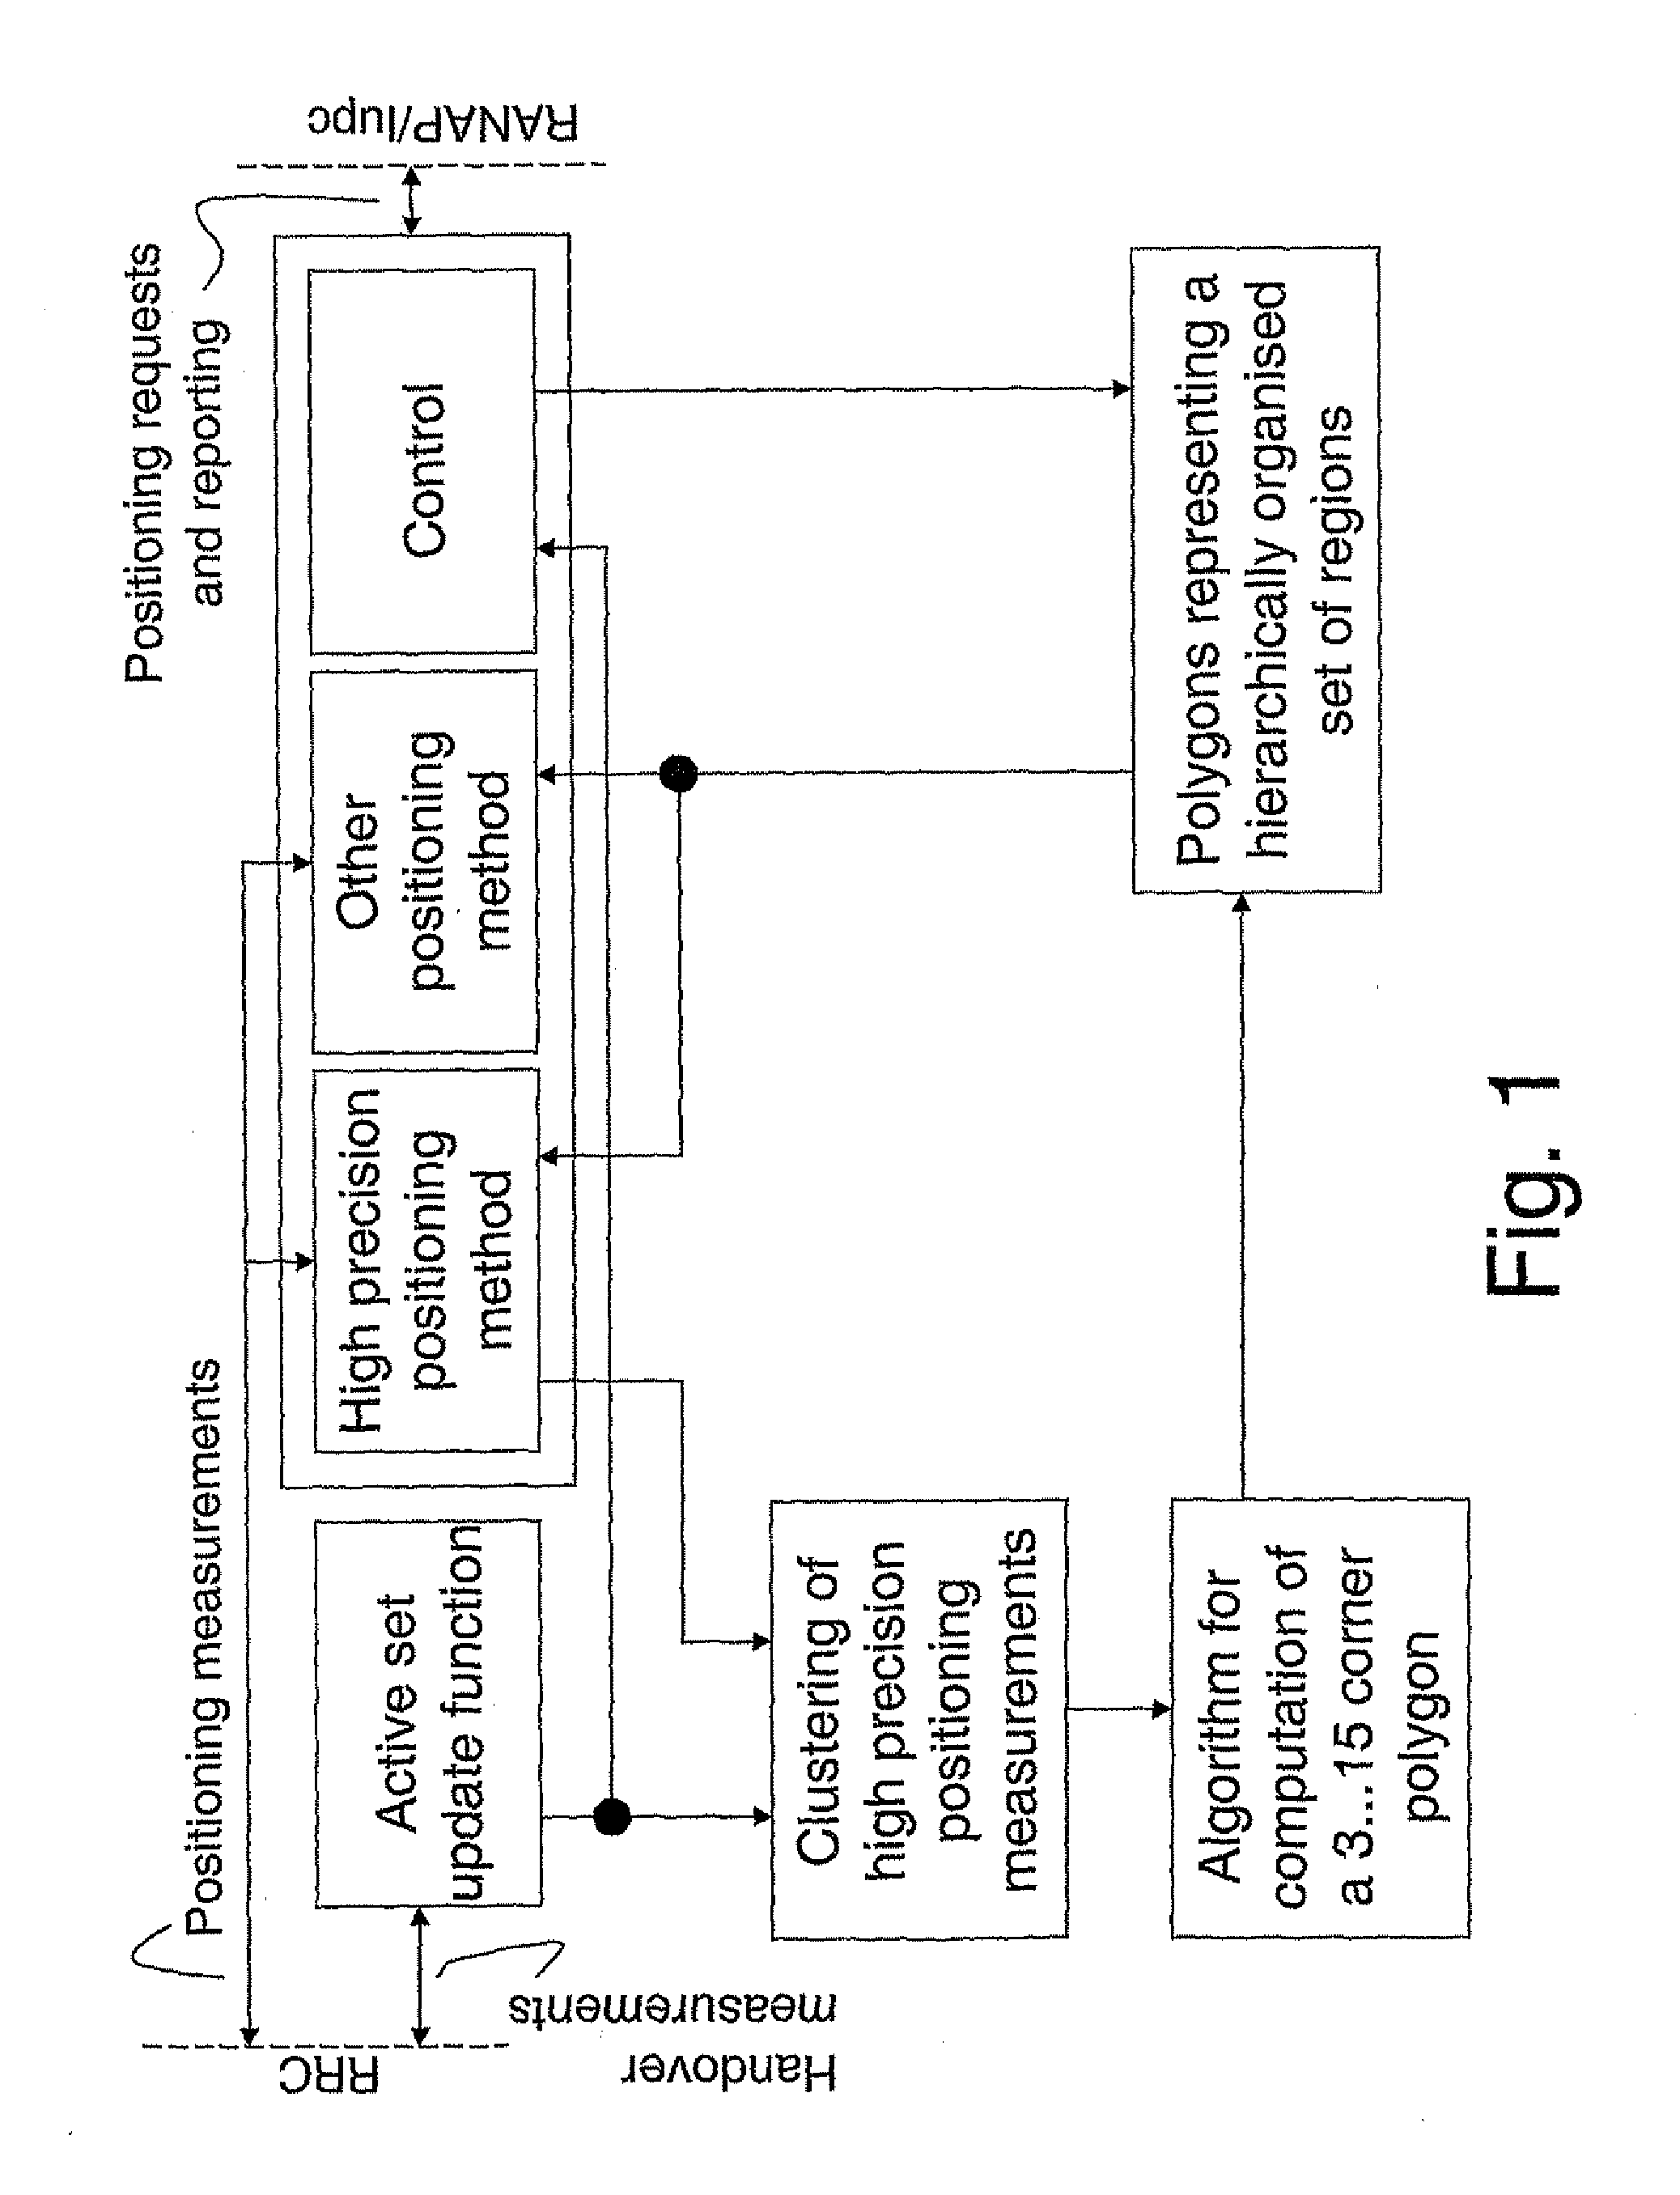 Method and arrangement for high precision position reference measurements at indoor locations